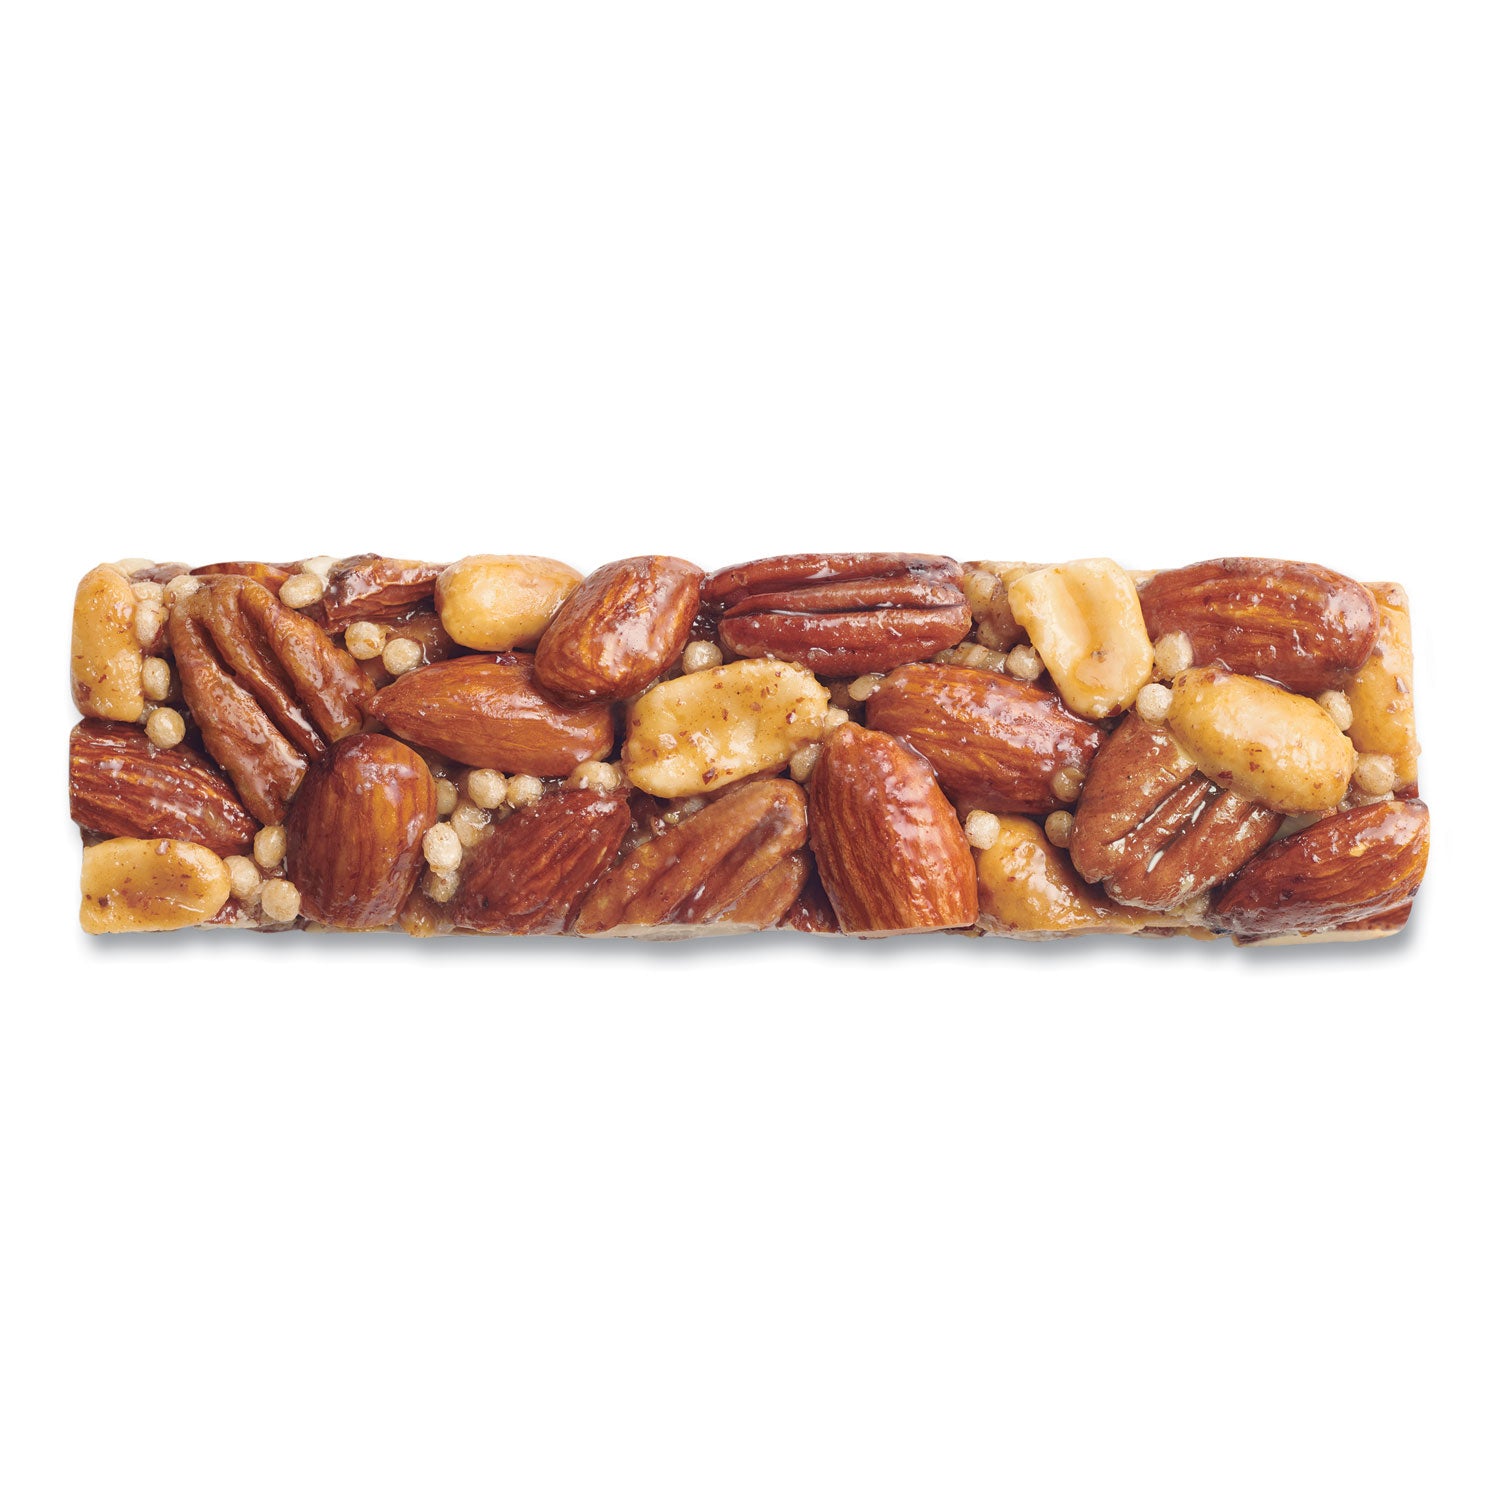 nuts-and-spices-bar-maple-glazed-pecan-and-sea-salt-14-oz-bar-12-box_knd17930 - 4